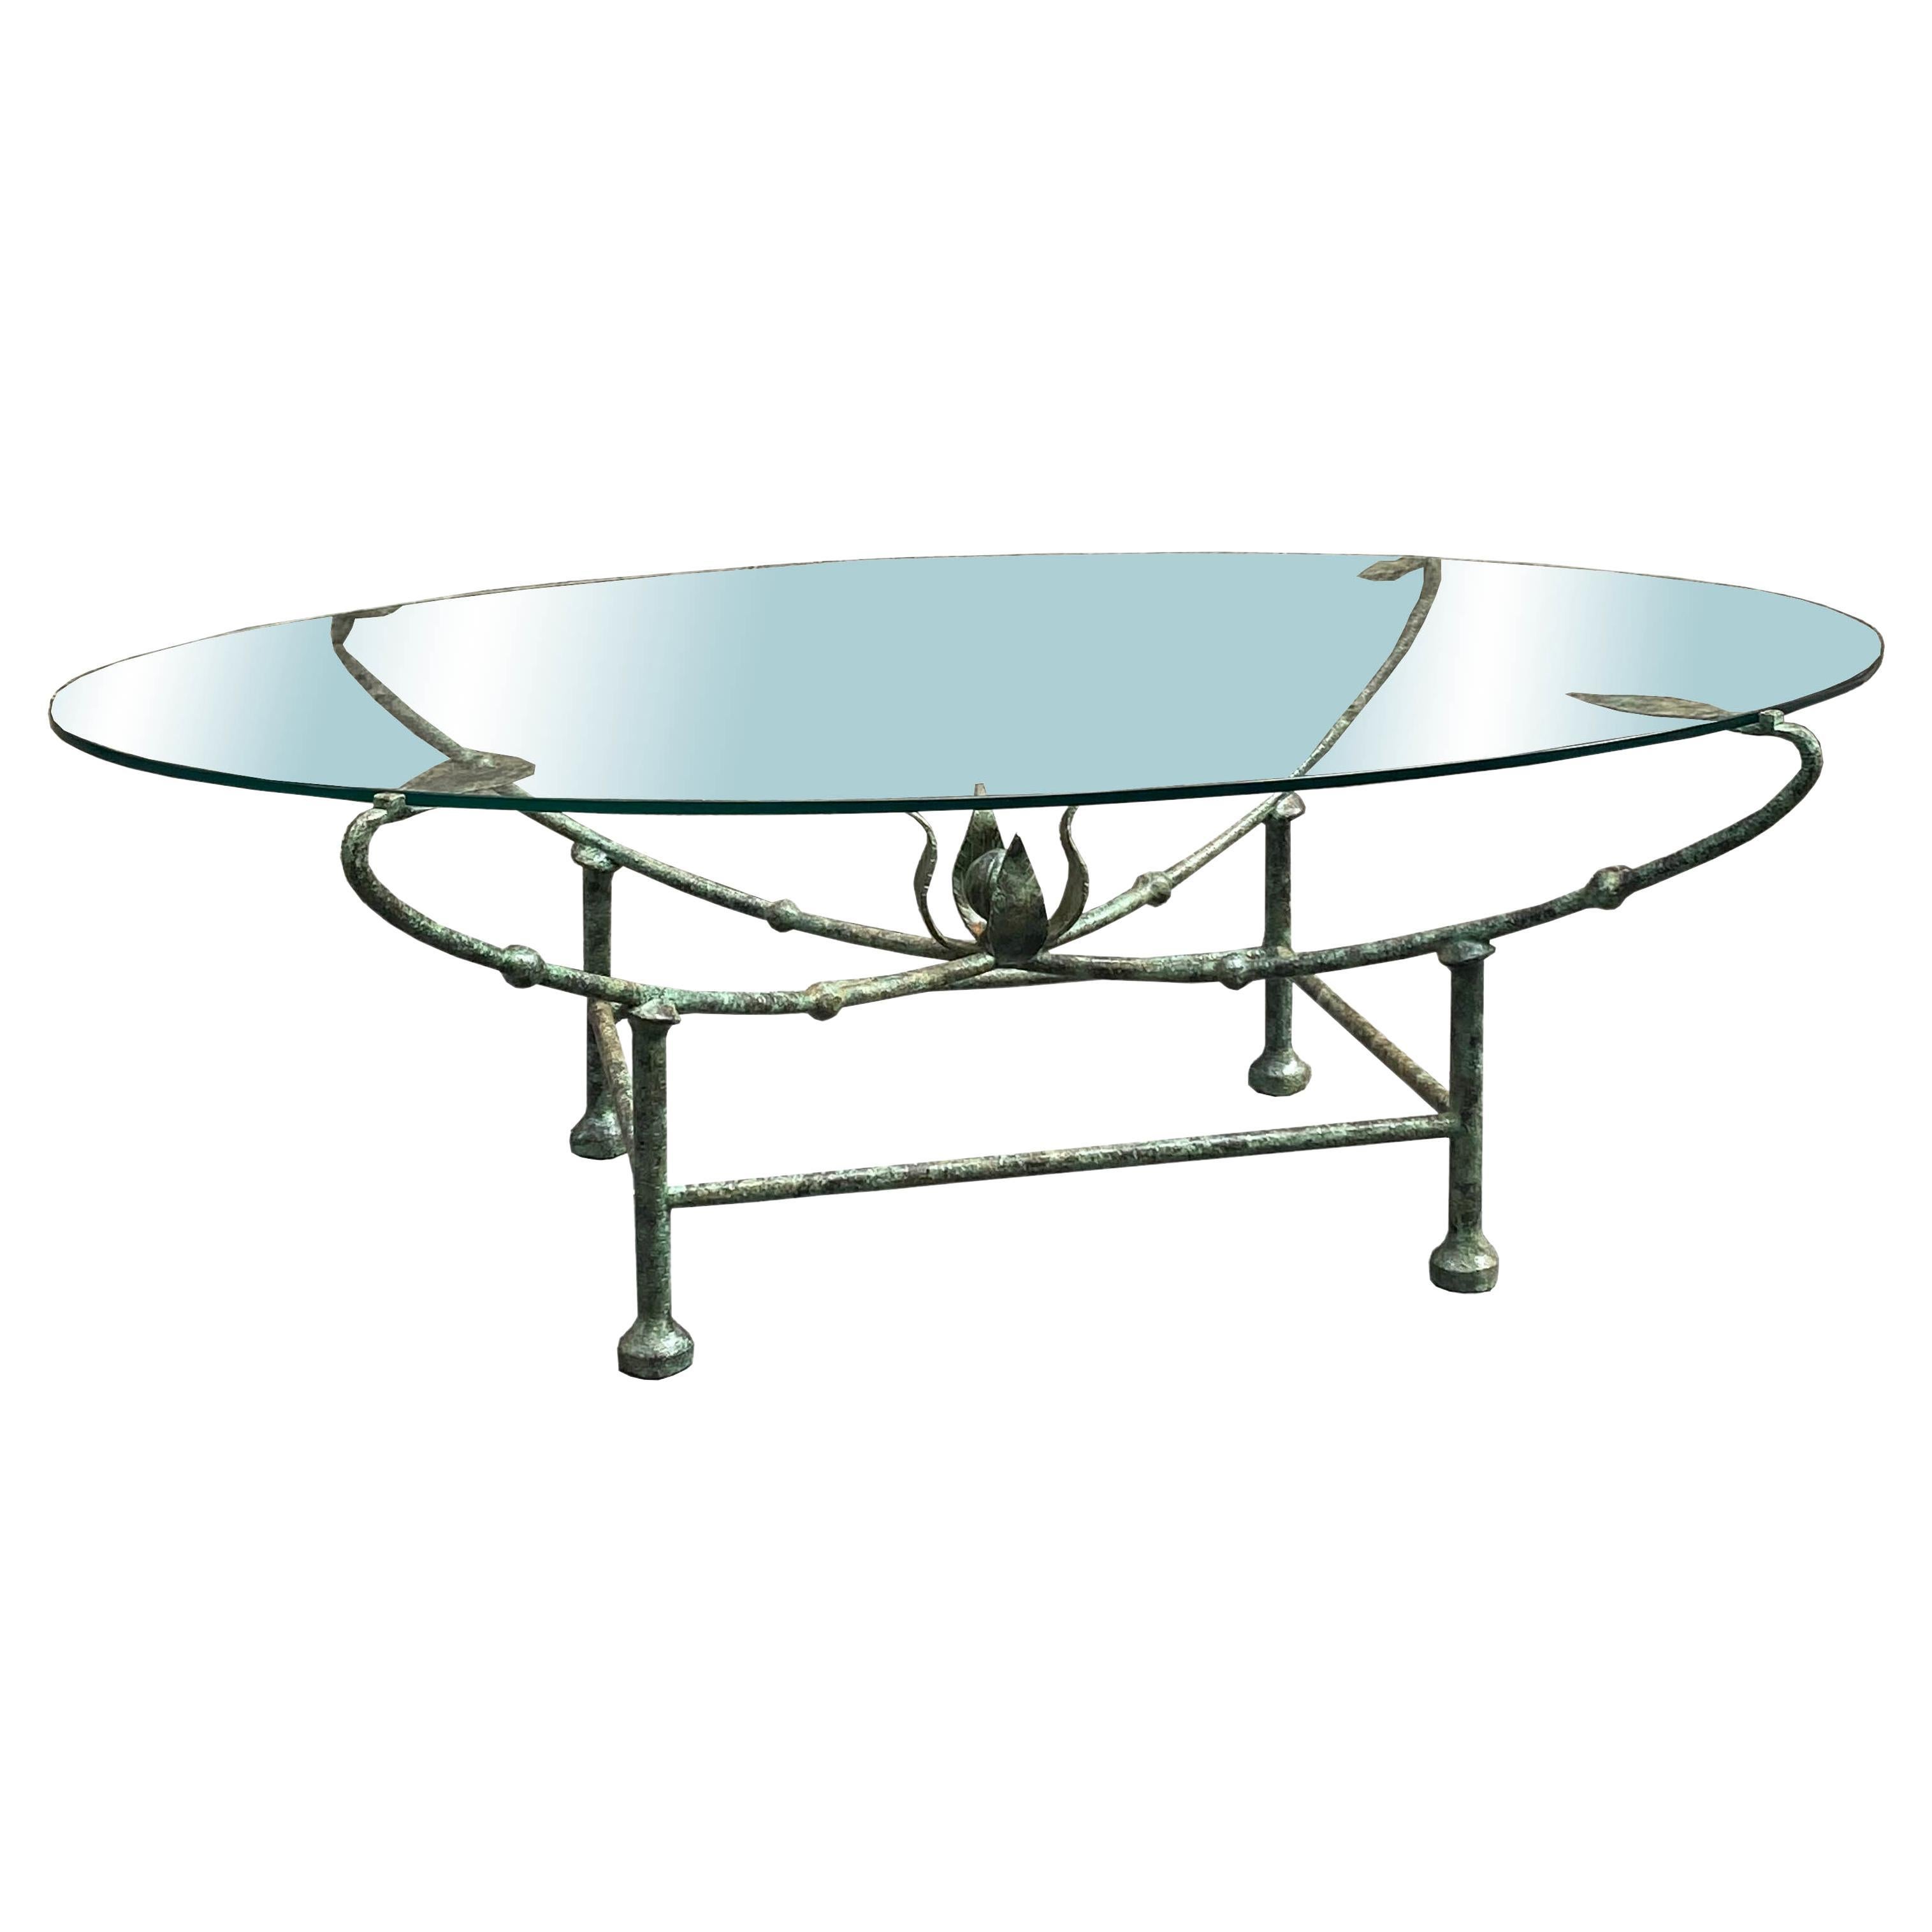 Giacometti Style Oval Wrought Iron Coffee Table with Glass Top, Italy, 1970s